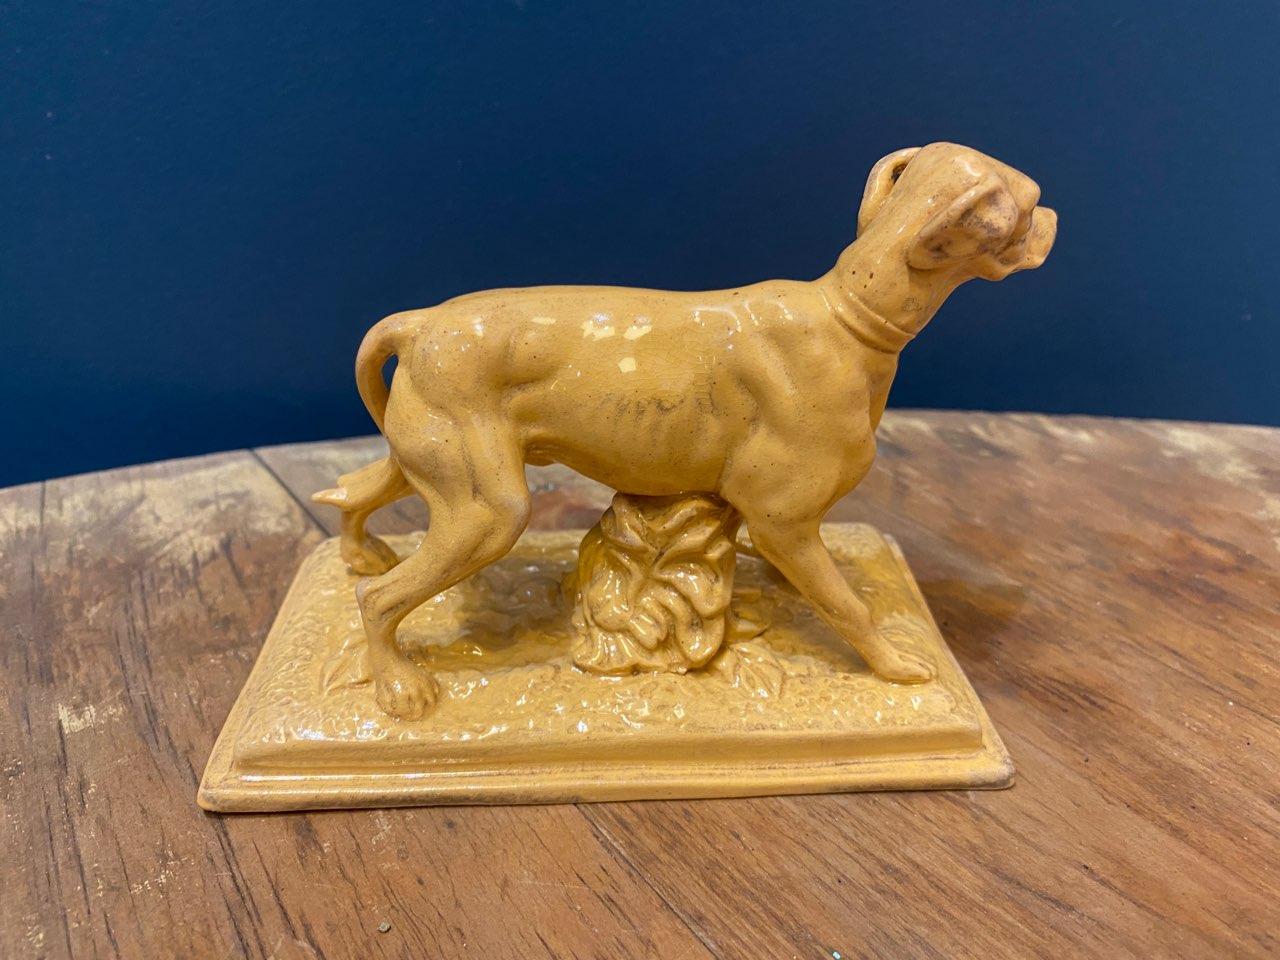 Small Early 19th century ceramic figurine of a pointer dog
Marked 